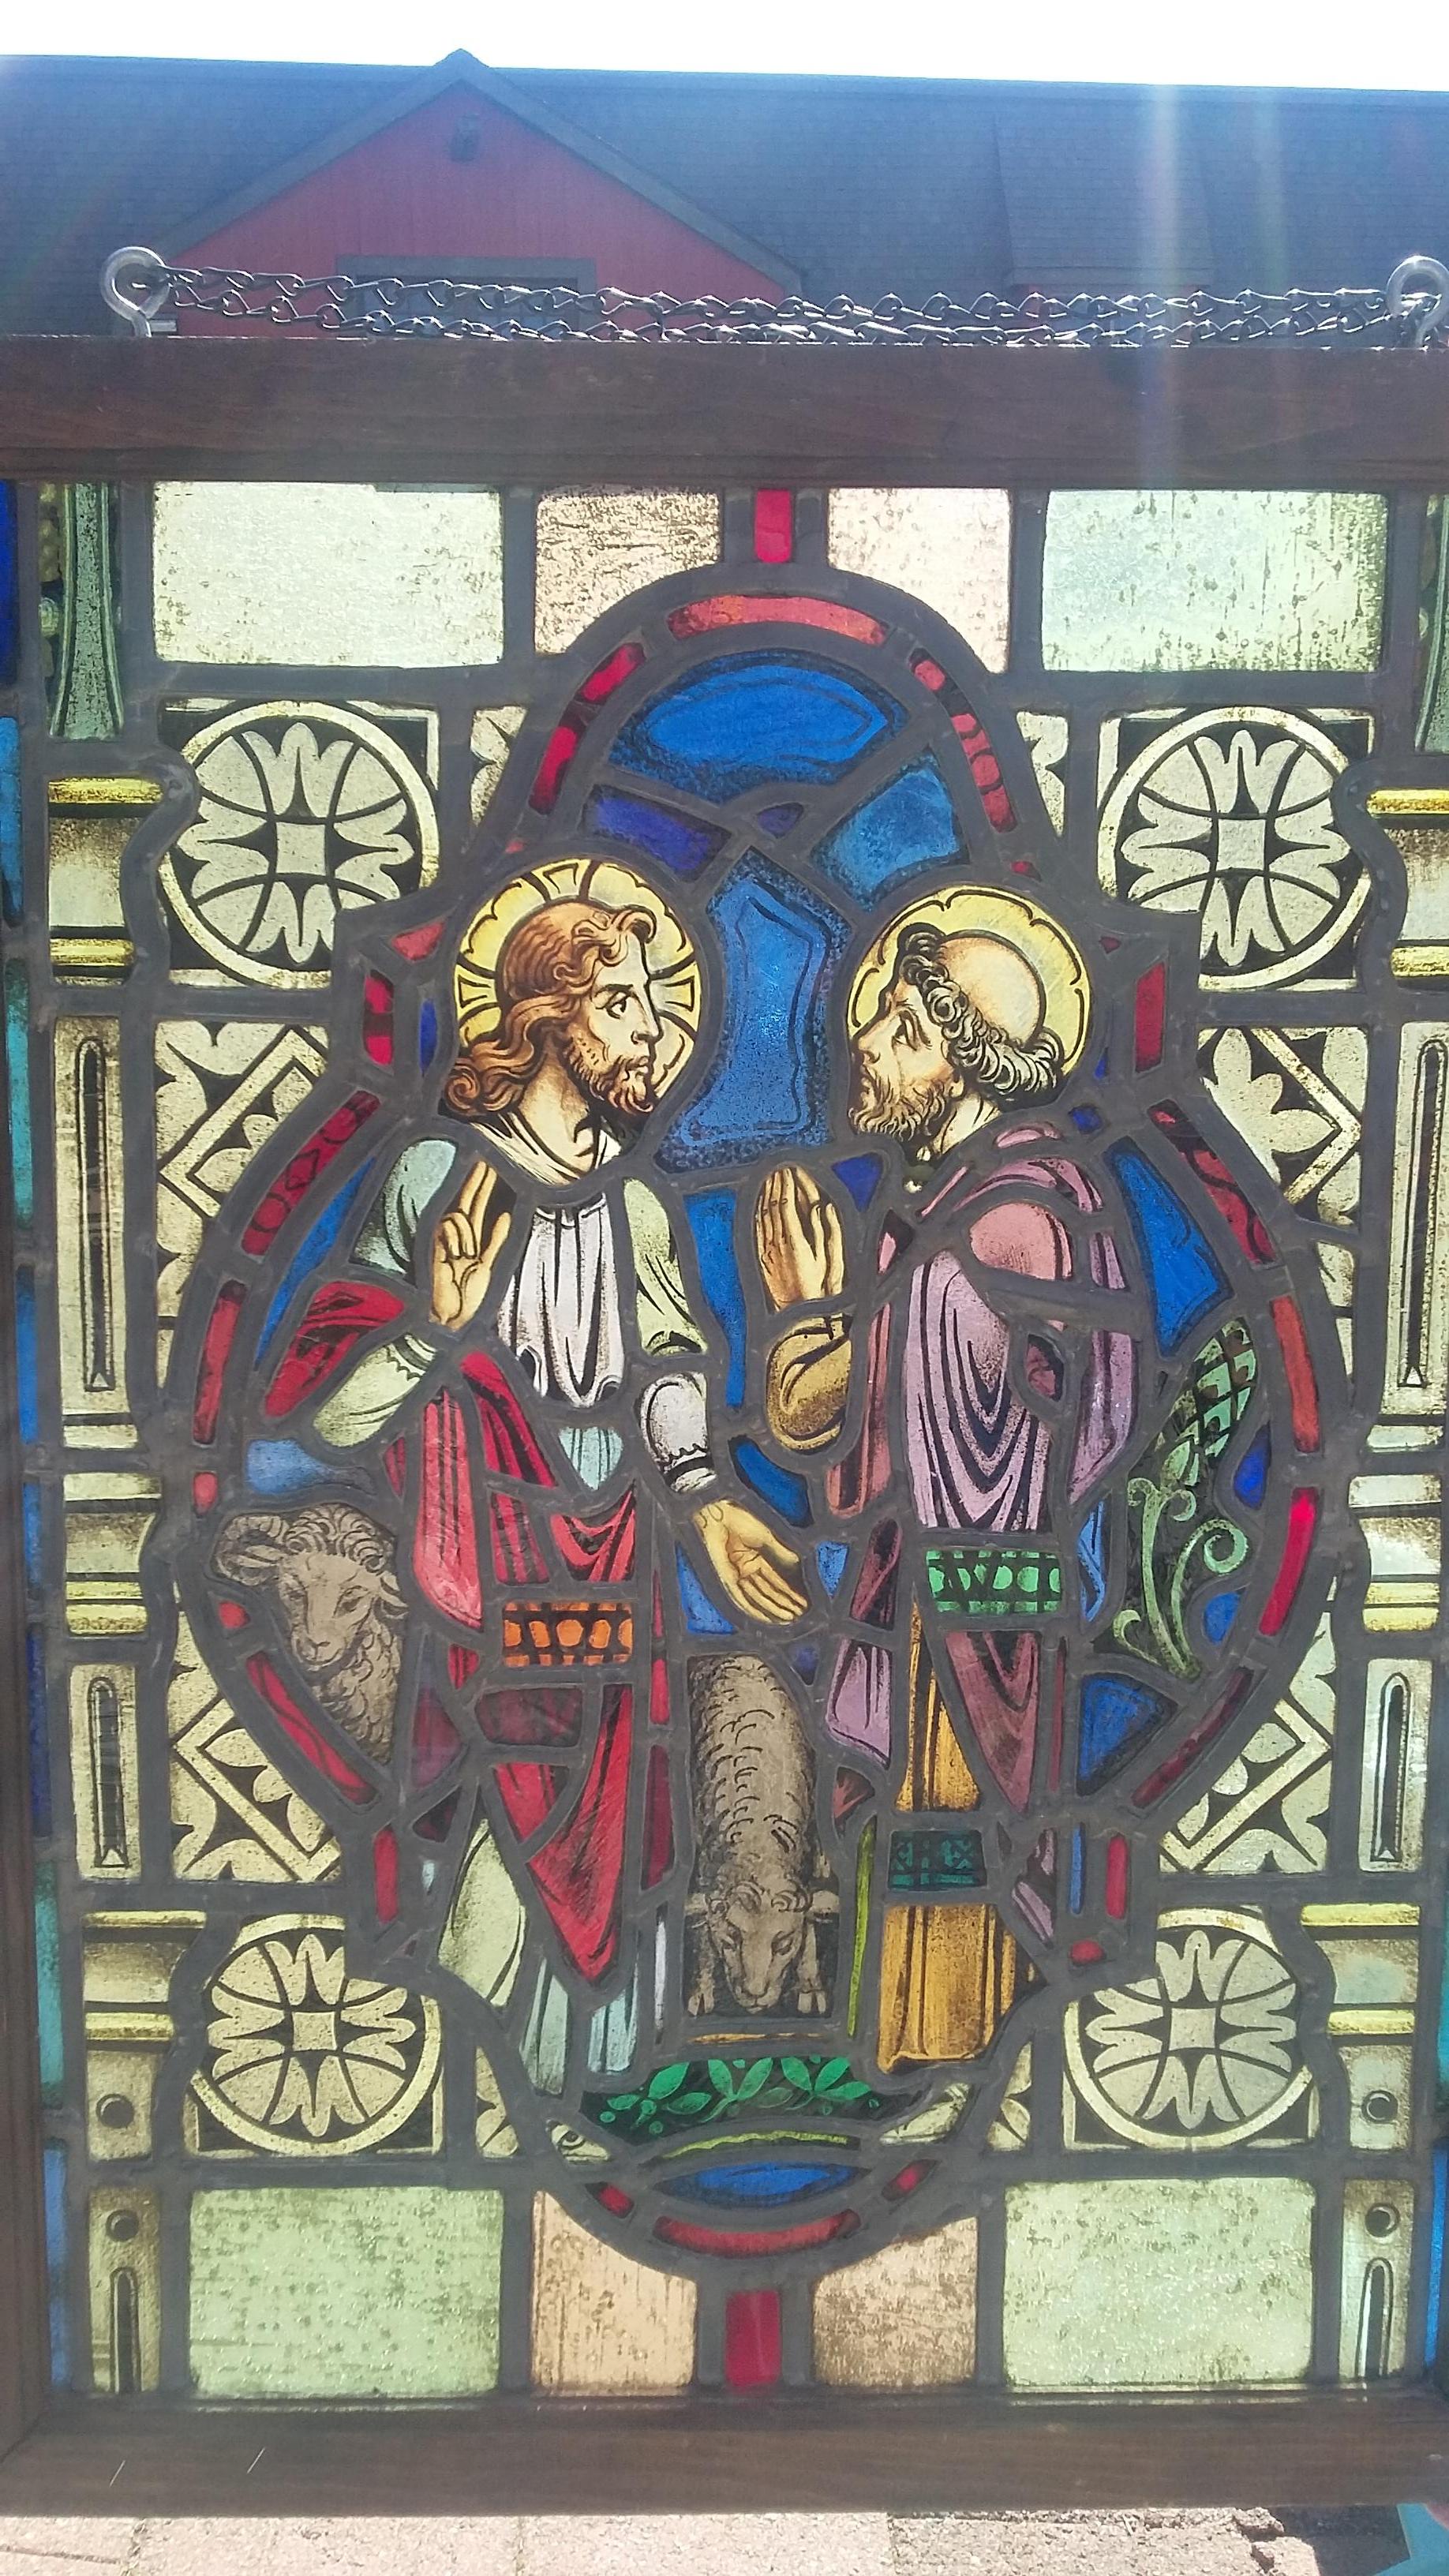 Beautiful vintage 19th century stained-glass window. Excellent condition depicting Jesus and an unknown saint (St. Peter ?). The faces are hand painted and very detailed. There are also two painted lambs on the bottom left. Nice small sized window